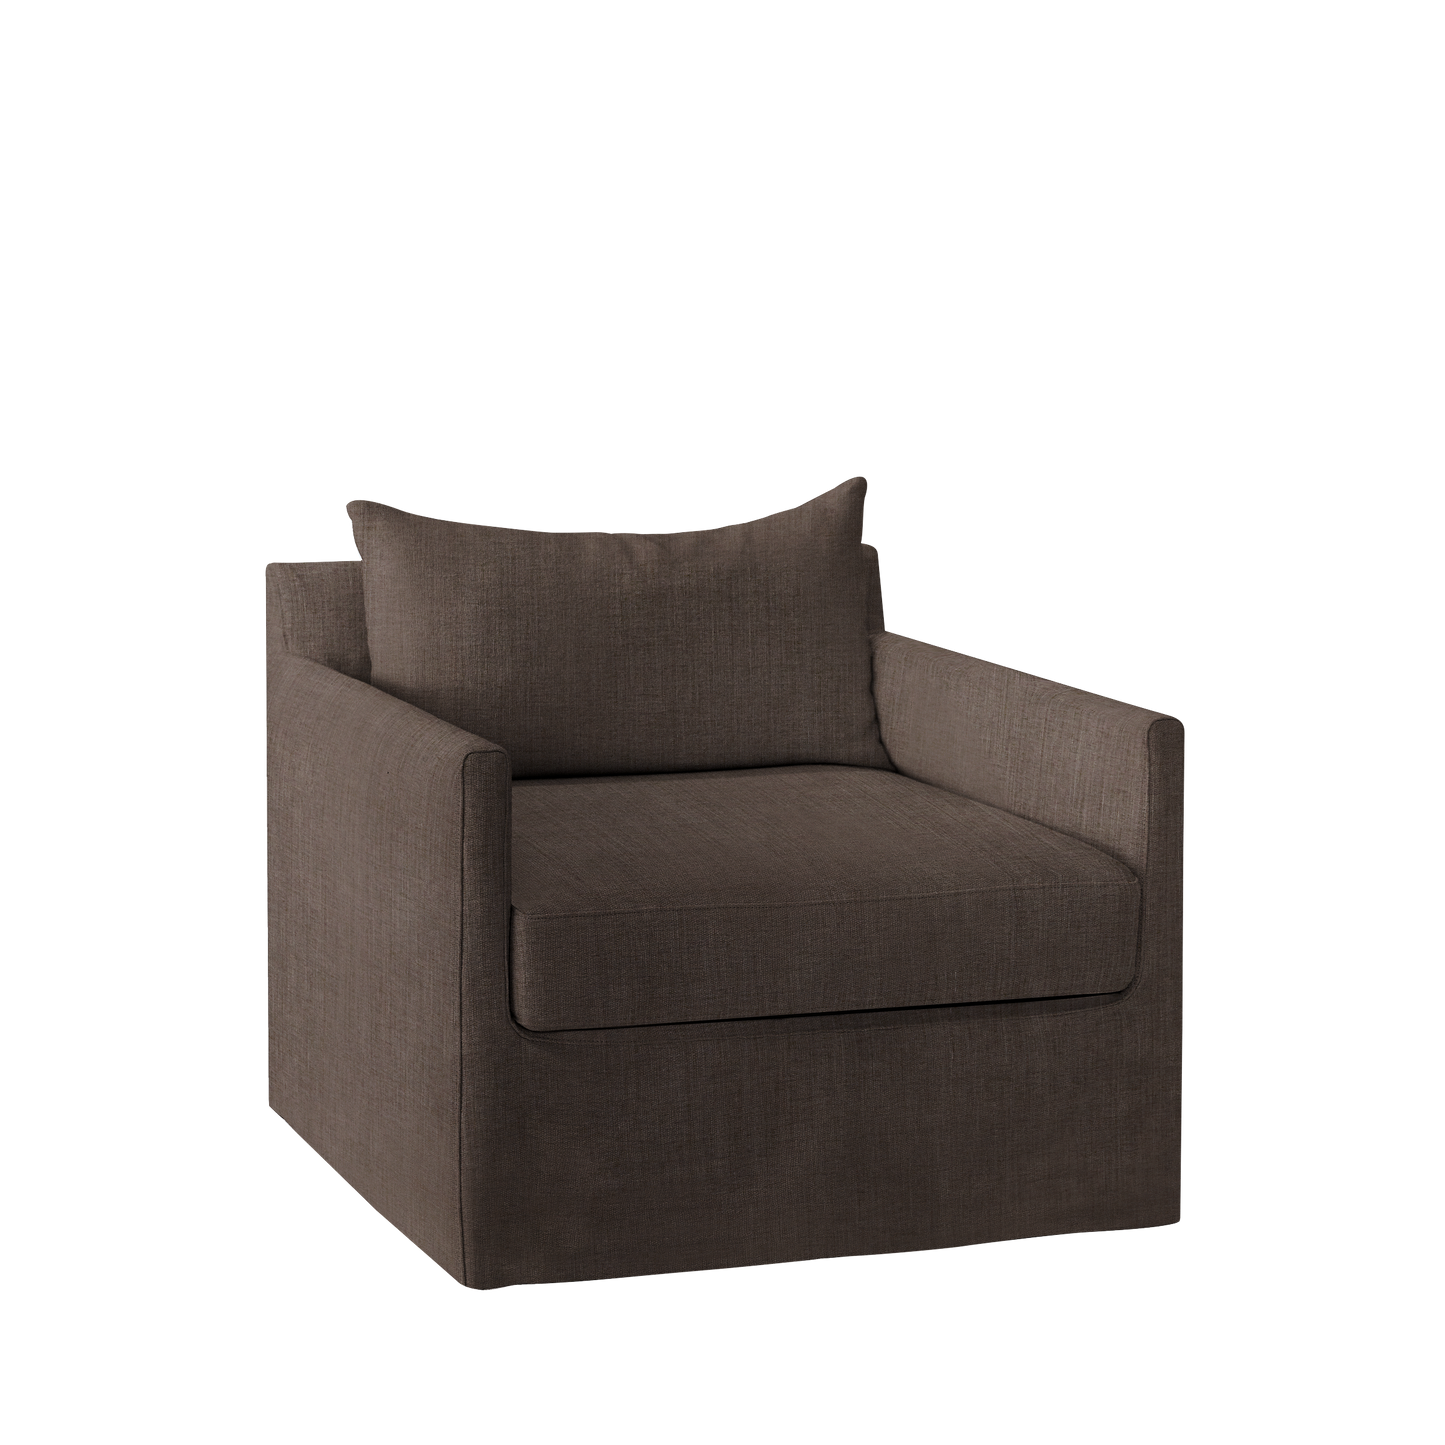 Extra wide Alba lounge chair with dark warm textile